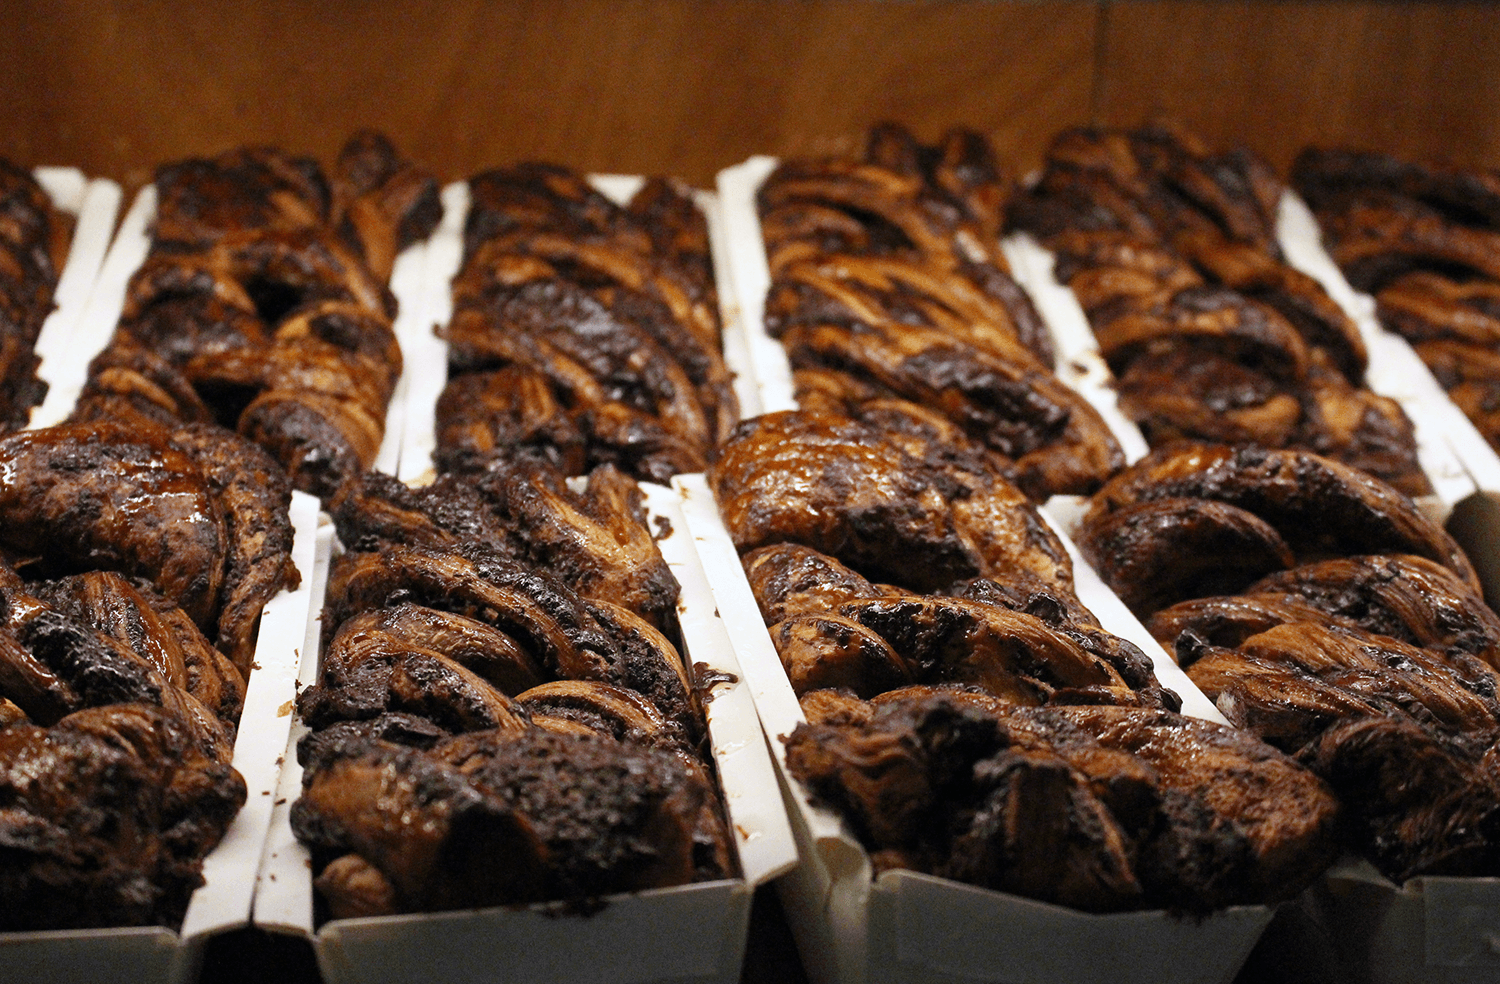 Chocolate babka at Breads Bakery Union Square (March 2020)